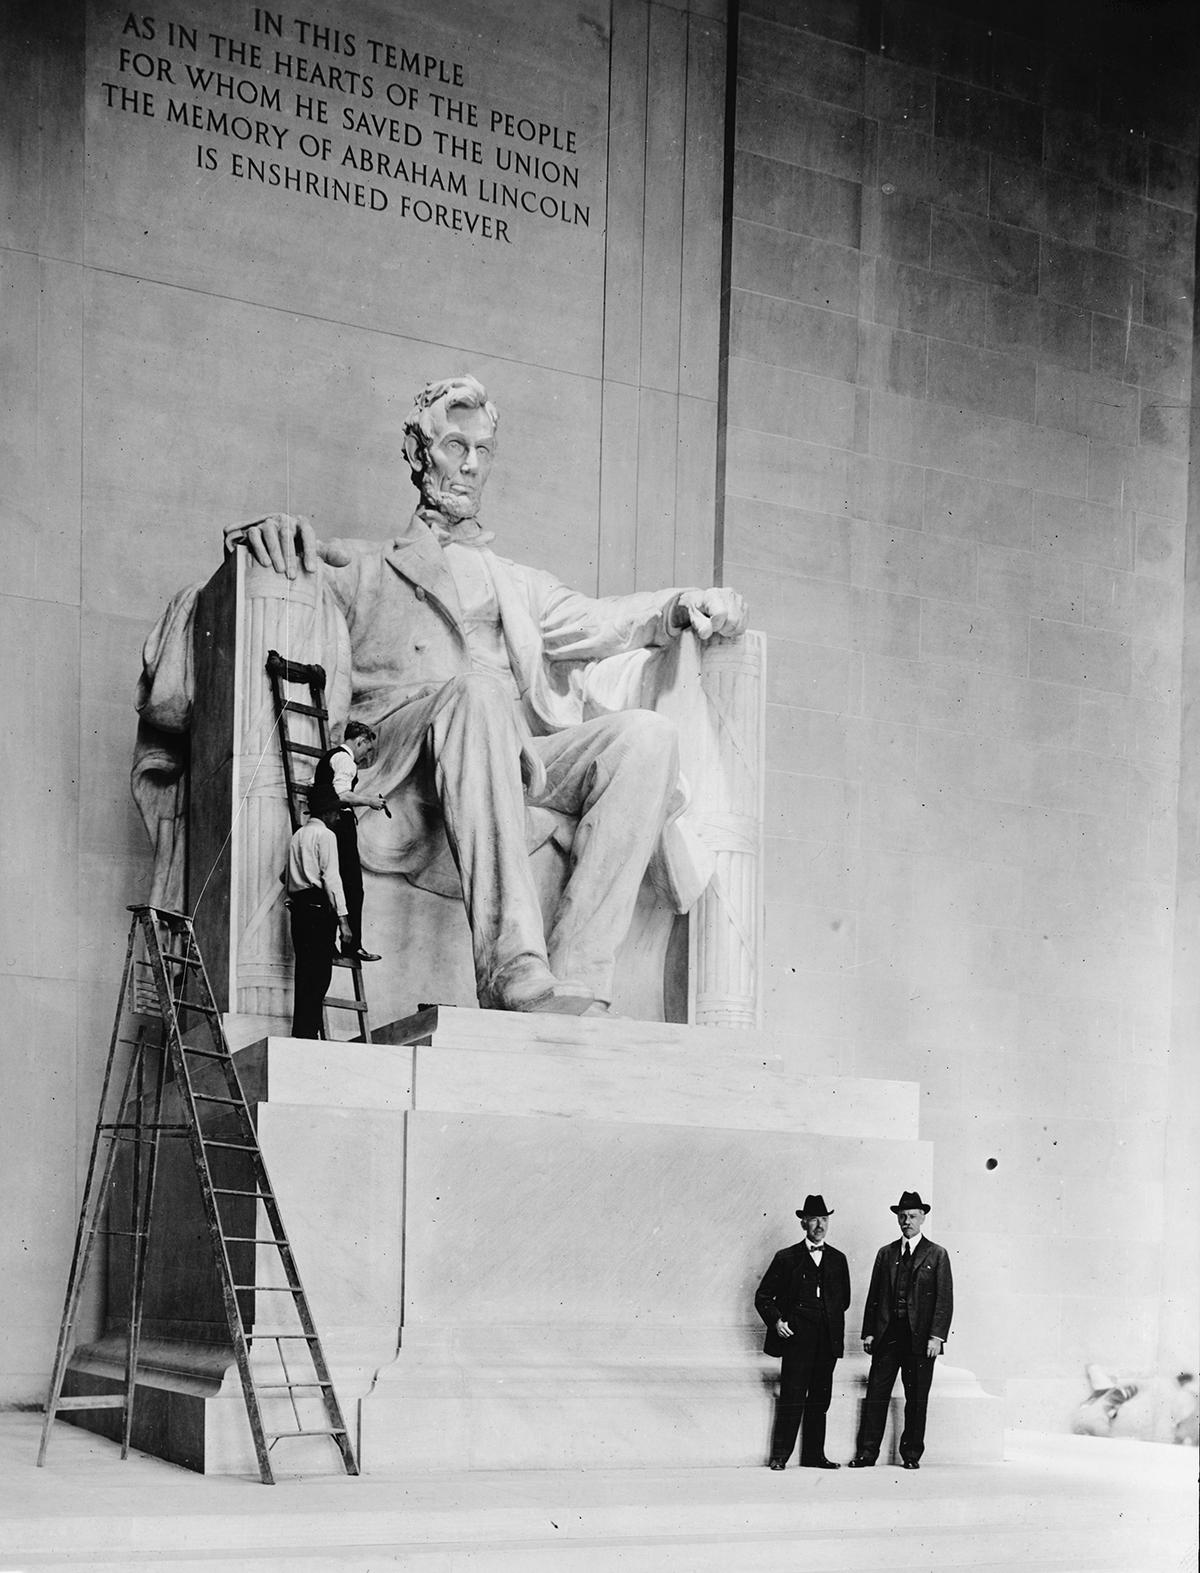 Daniel Chester French working on the colossal, 19-foot-high statue of Lincoln. Library of Congress. (Public Domain)